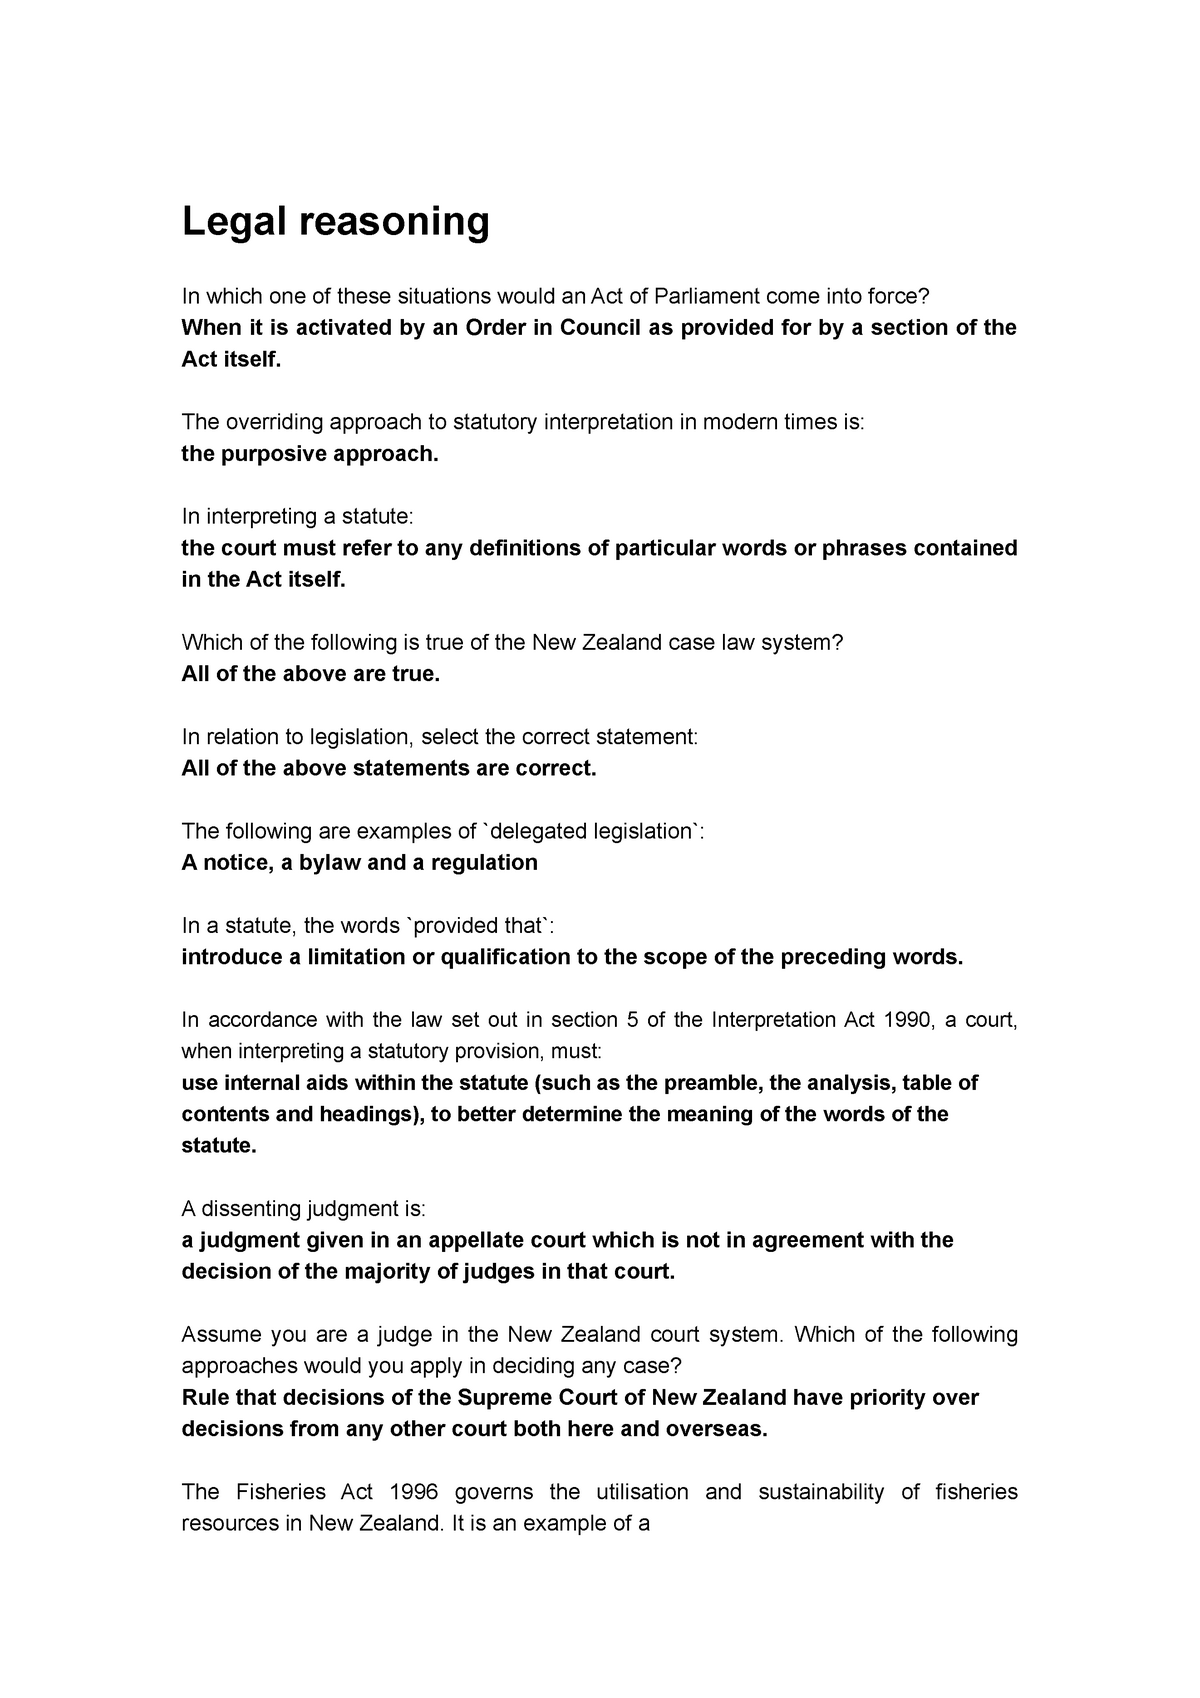 Comlaw quiz answers 30 - quiz 30 answer - Commercial Law